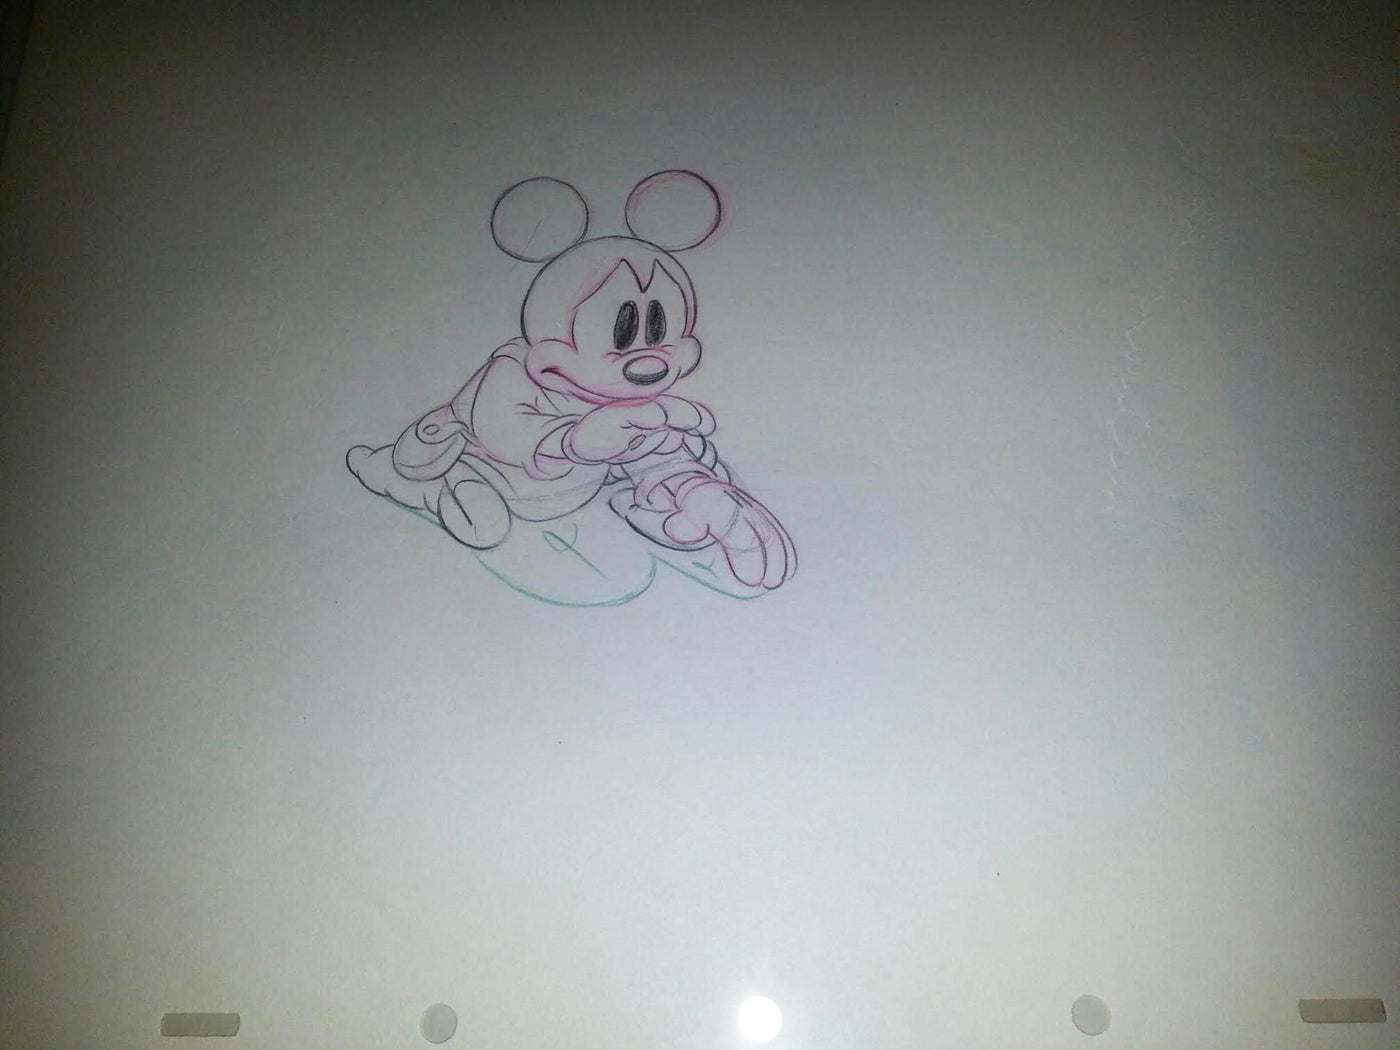 Original Walt Disney Production Drawing from Brave Little Tailor (1938) featuring Mickey Mouse